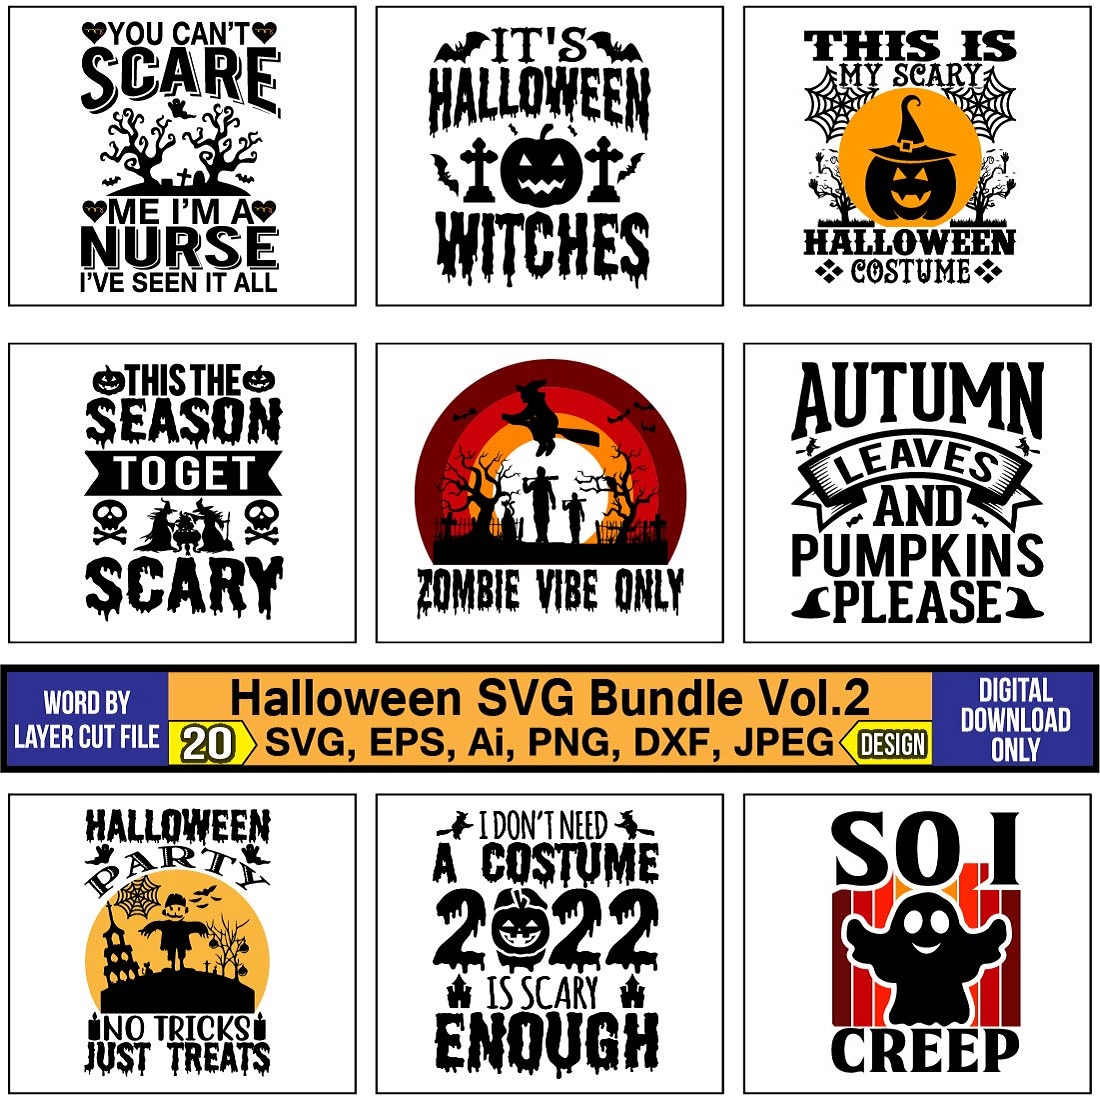 Pack of adorable images for prints on the theme of Halloween.